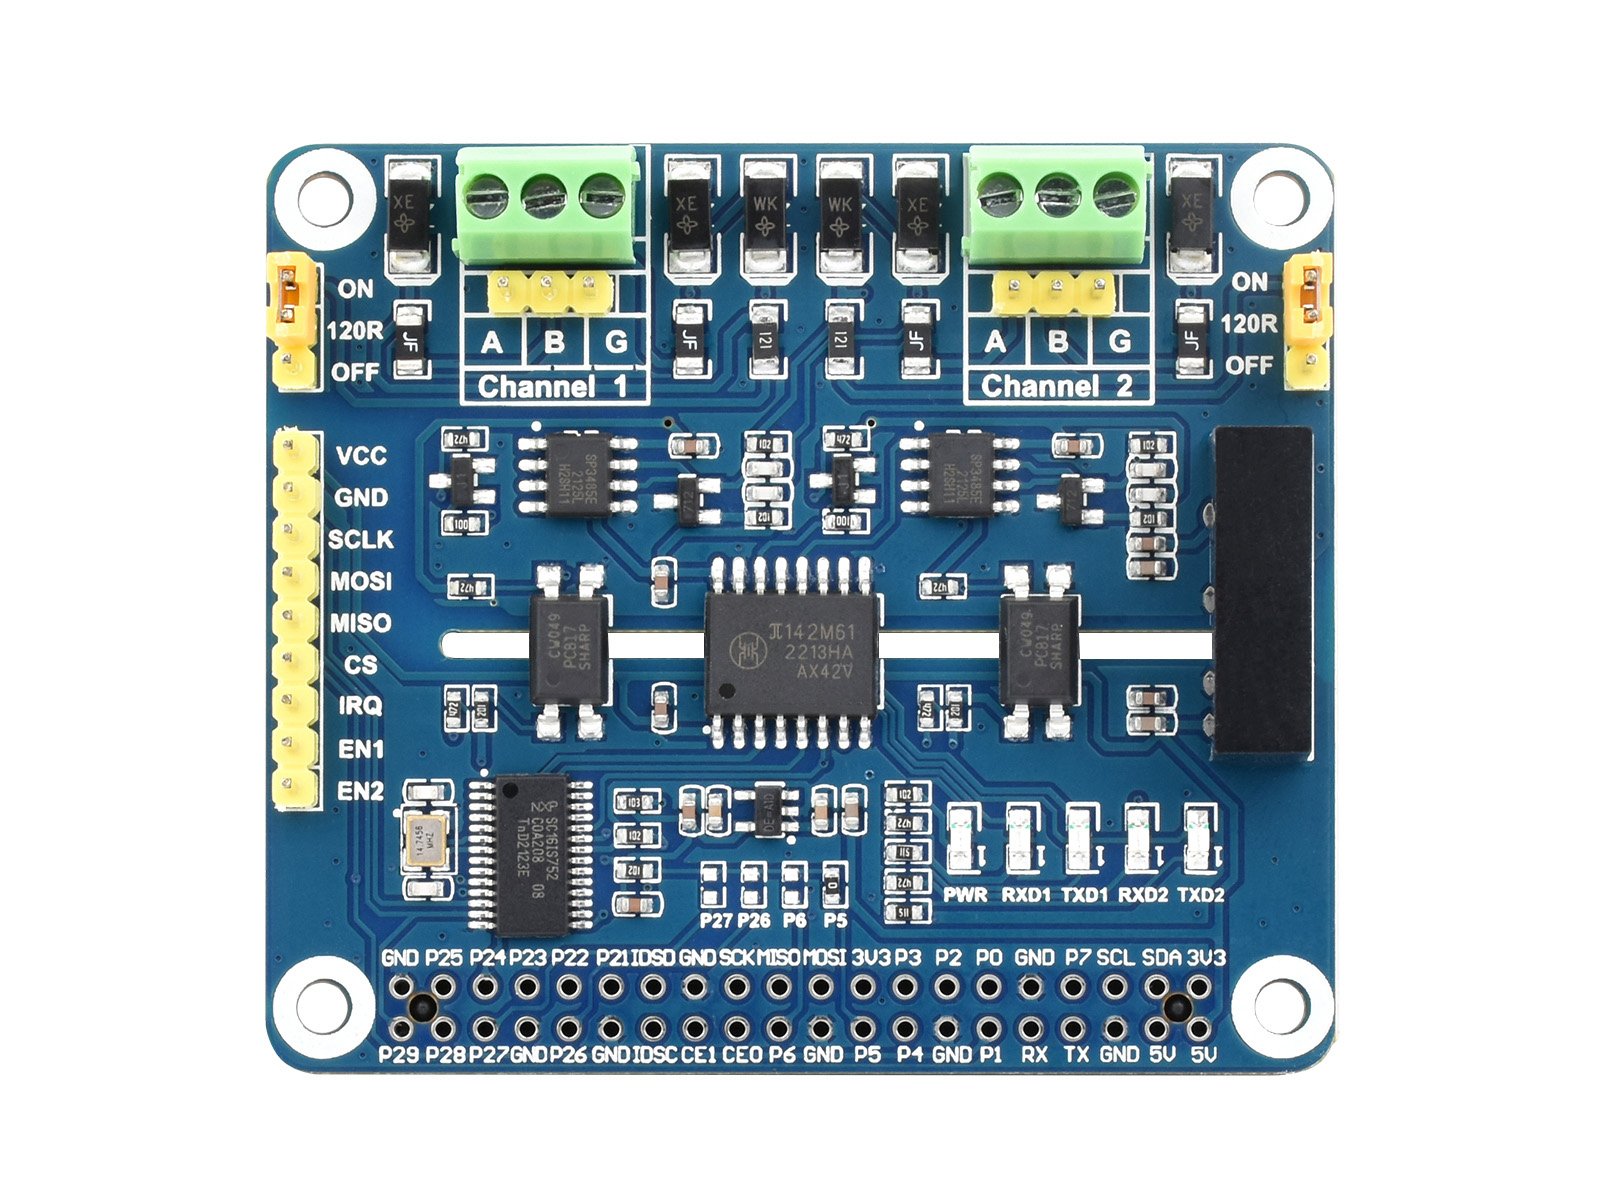 2-Channel Isolated RS485 Expansion HAT for Raspberry Pi